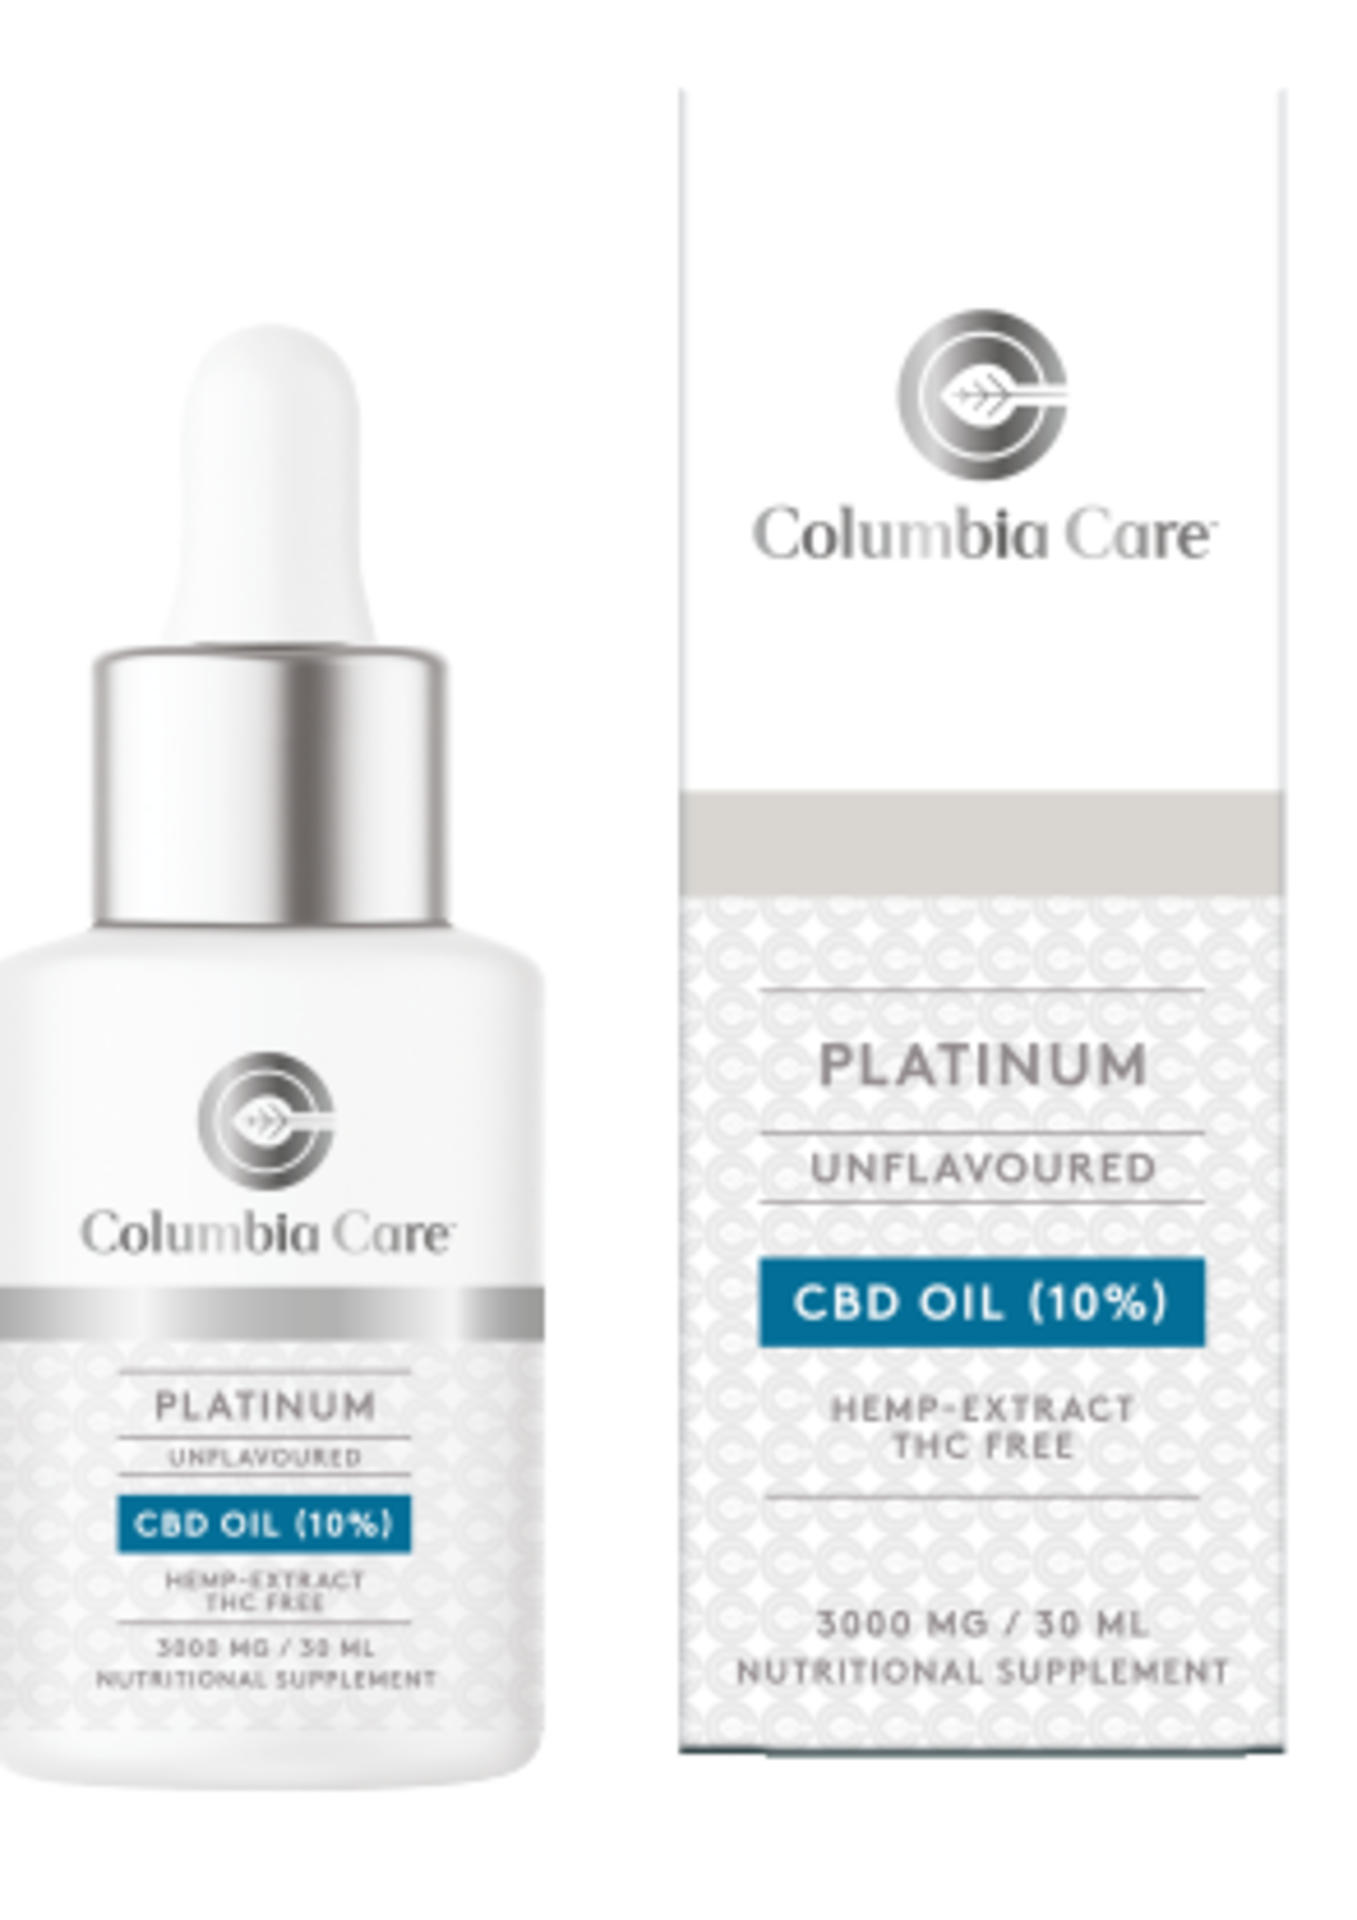 15 x Brand New Columbia Care Platinum Unflavoured Flavored Tincture 30ml 3000mg. Columbia Care, a